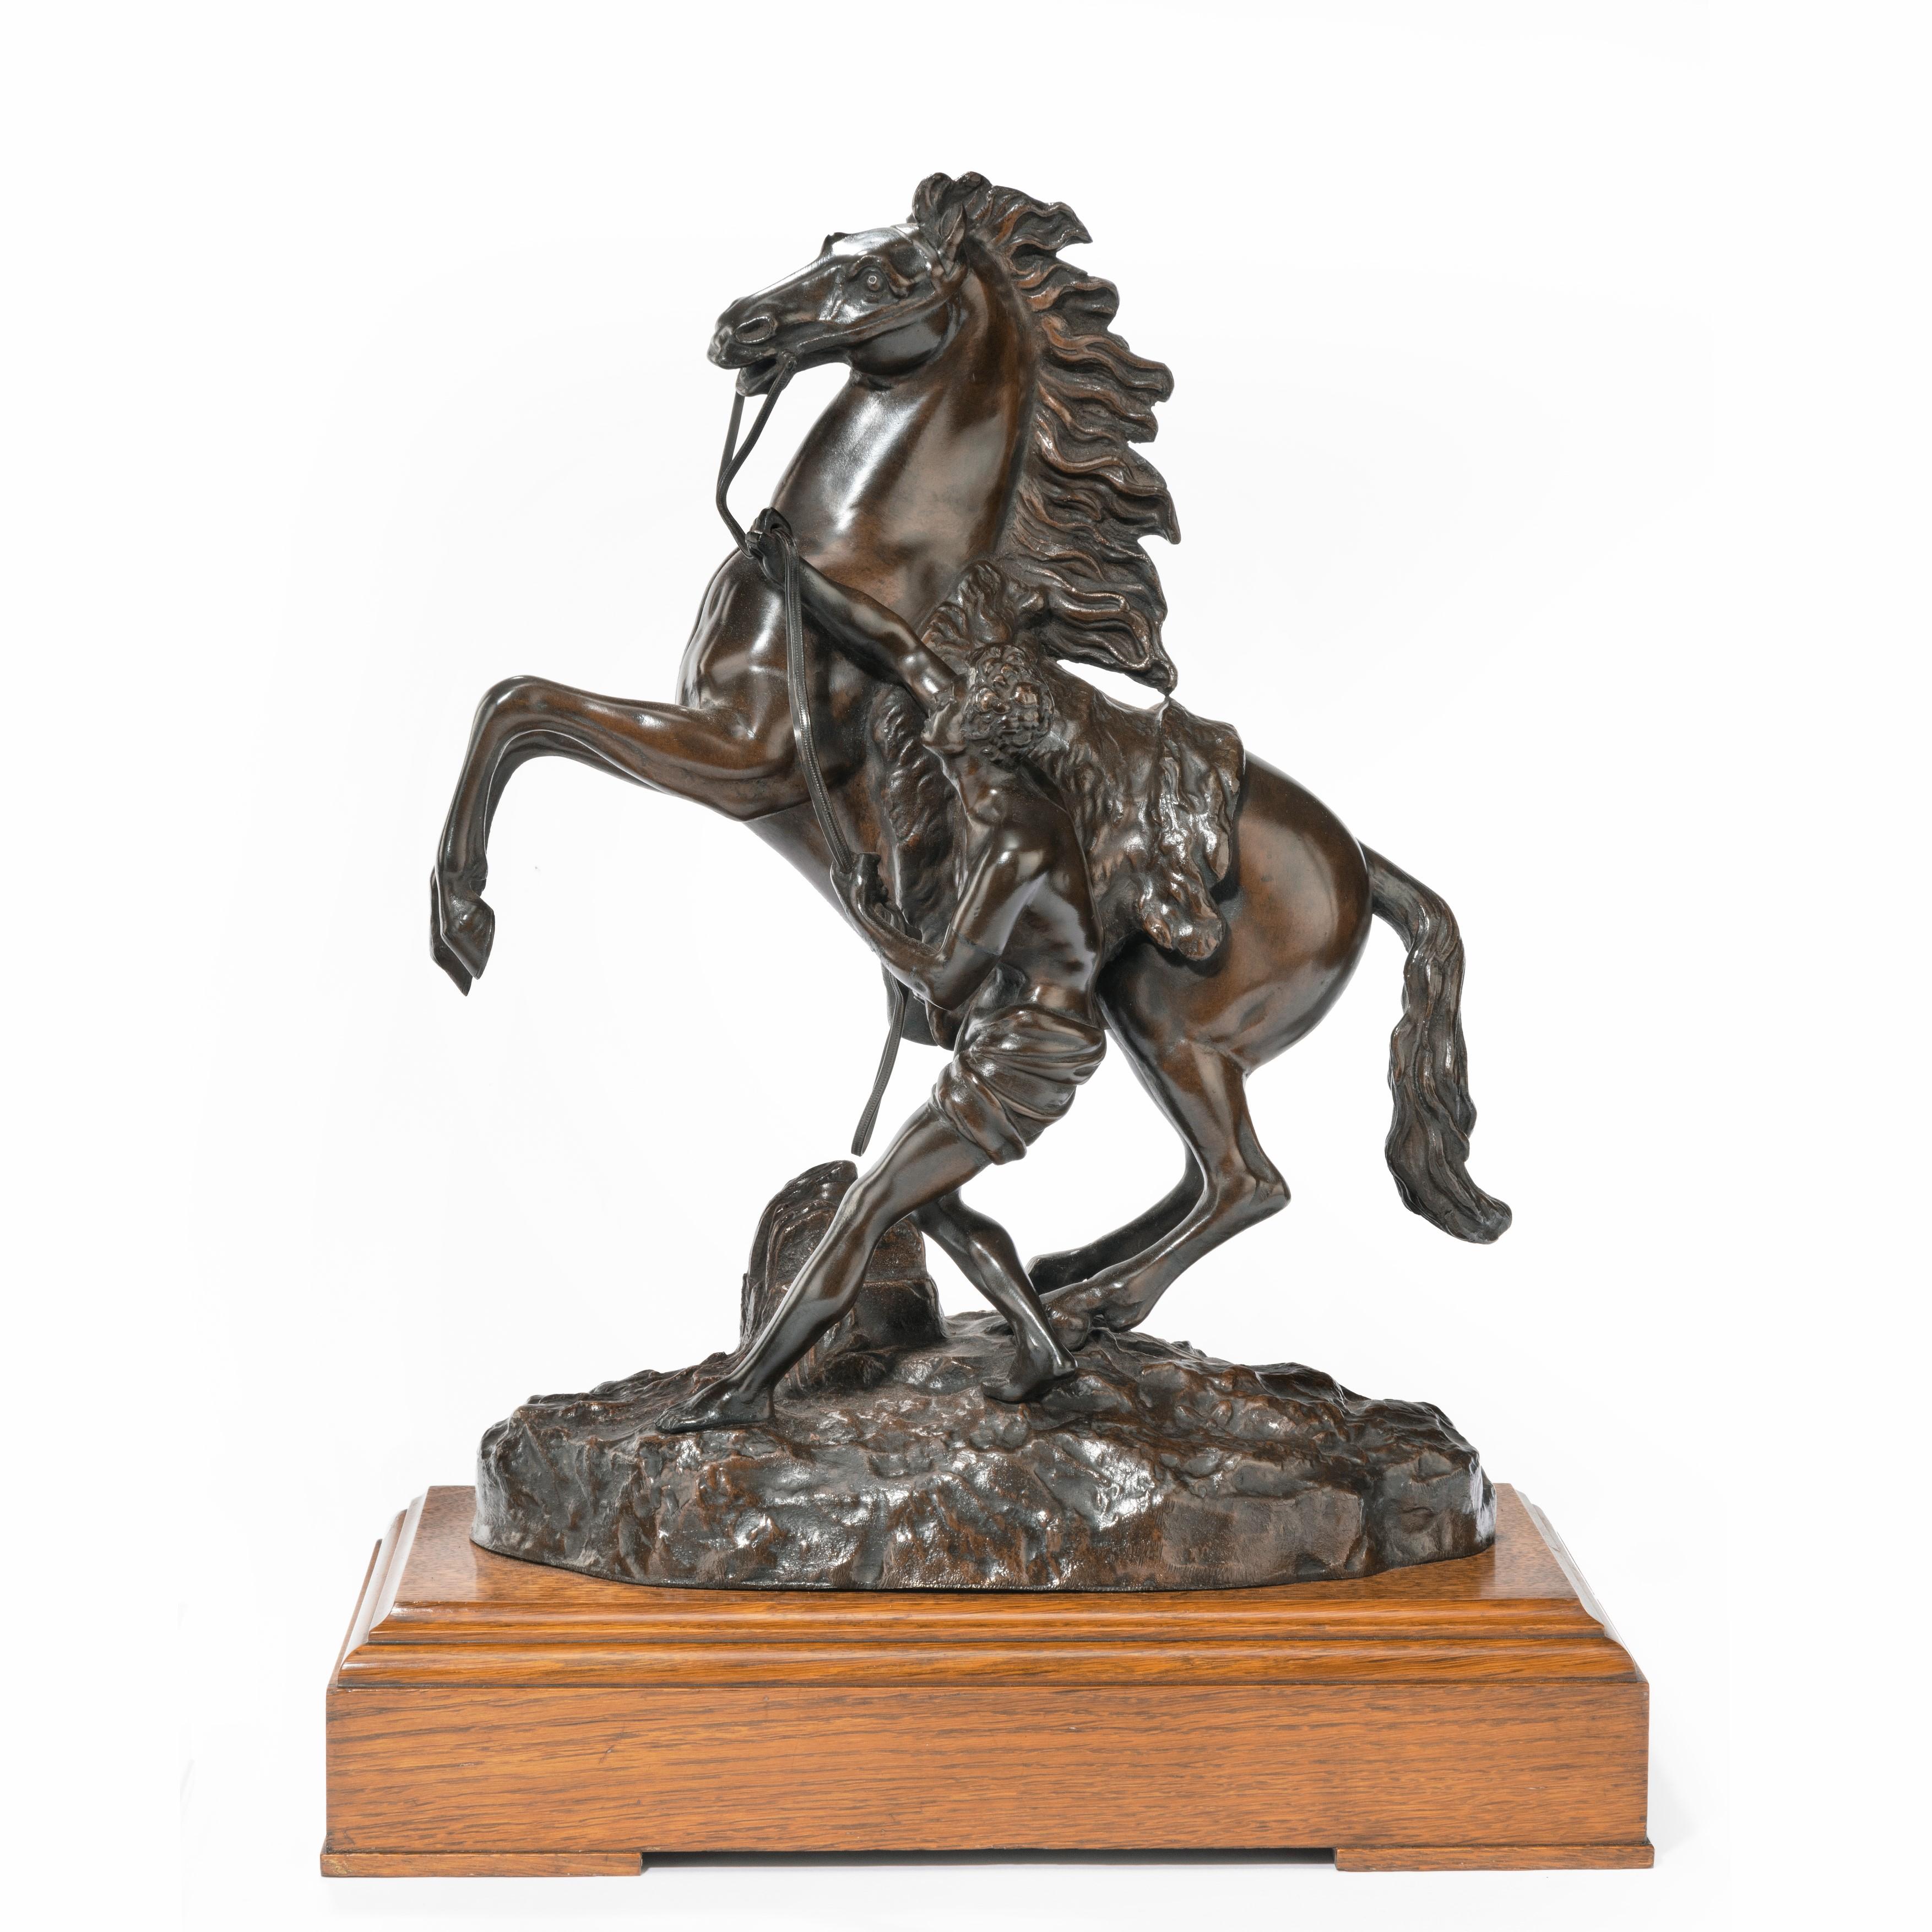 A good pair of 19th century bronze sculptures of the Marly horses, each showing a rearing wild horse with a flying mane, bridle and saddle-cloth being restrained by a groom, incised ‘Coustou’, on polished oak bases. French, circa 1900.

Footnote: